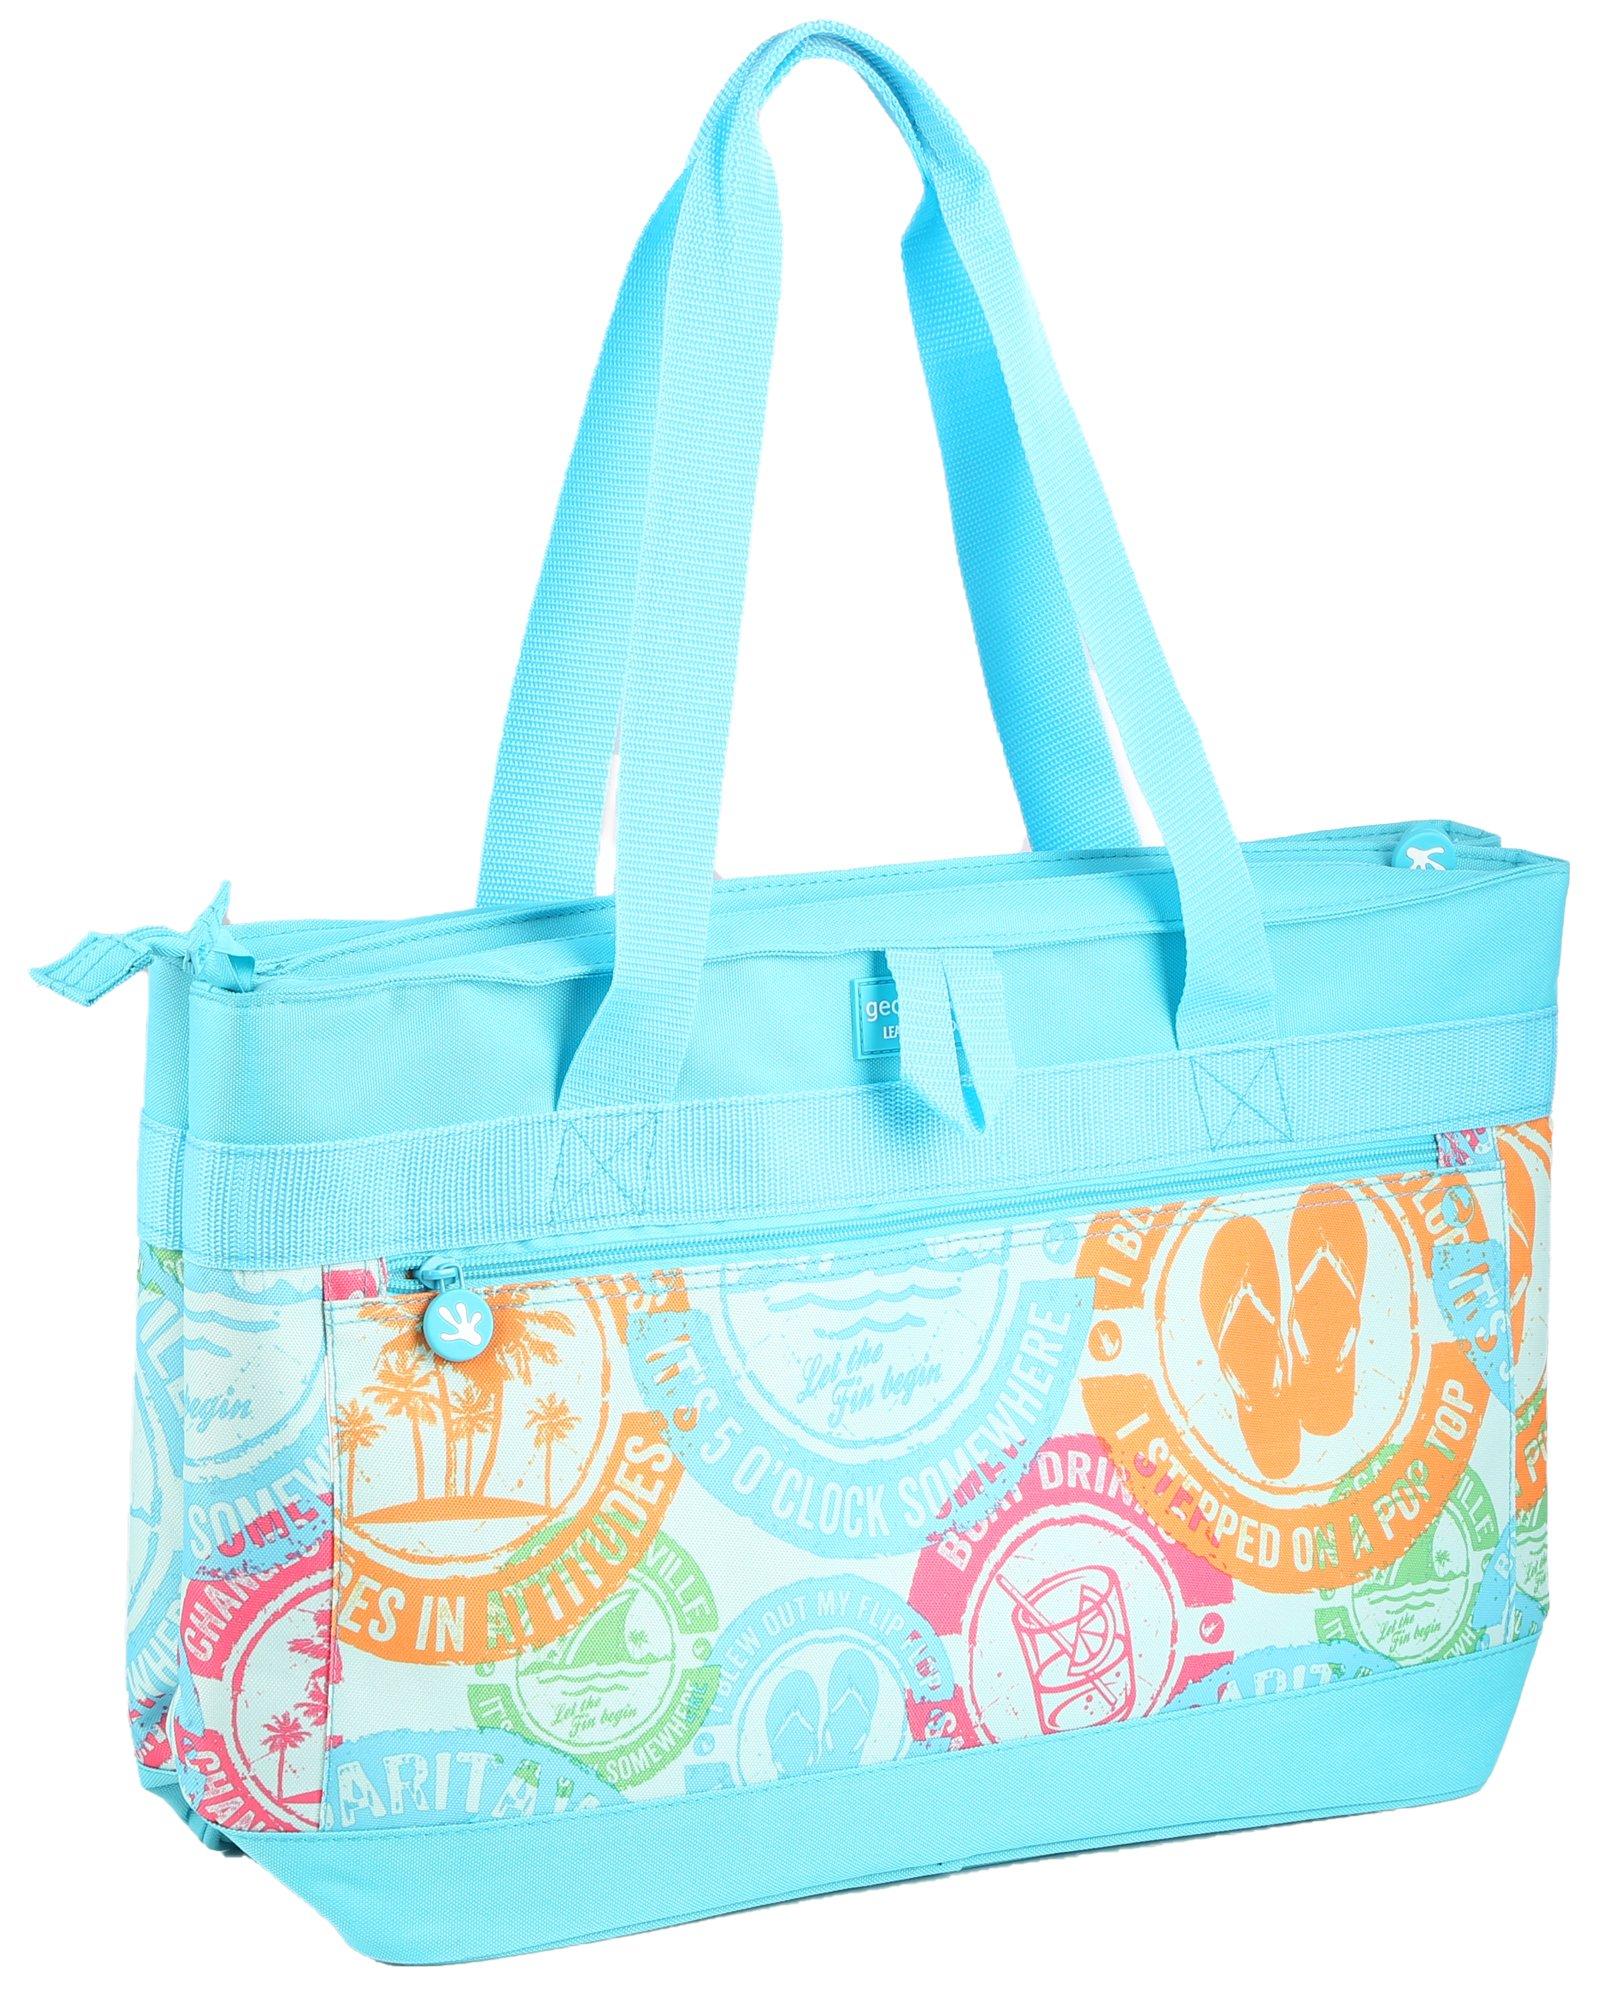 2 Compartment Tote Cooler